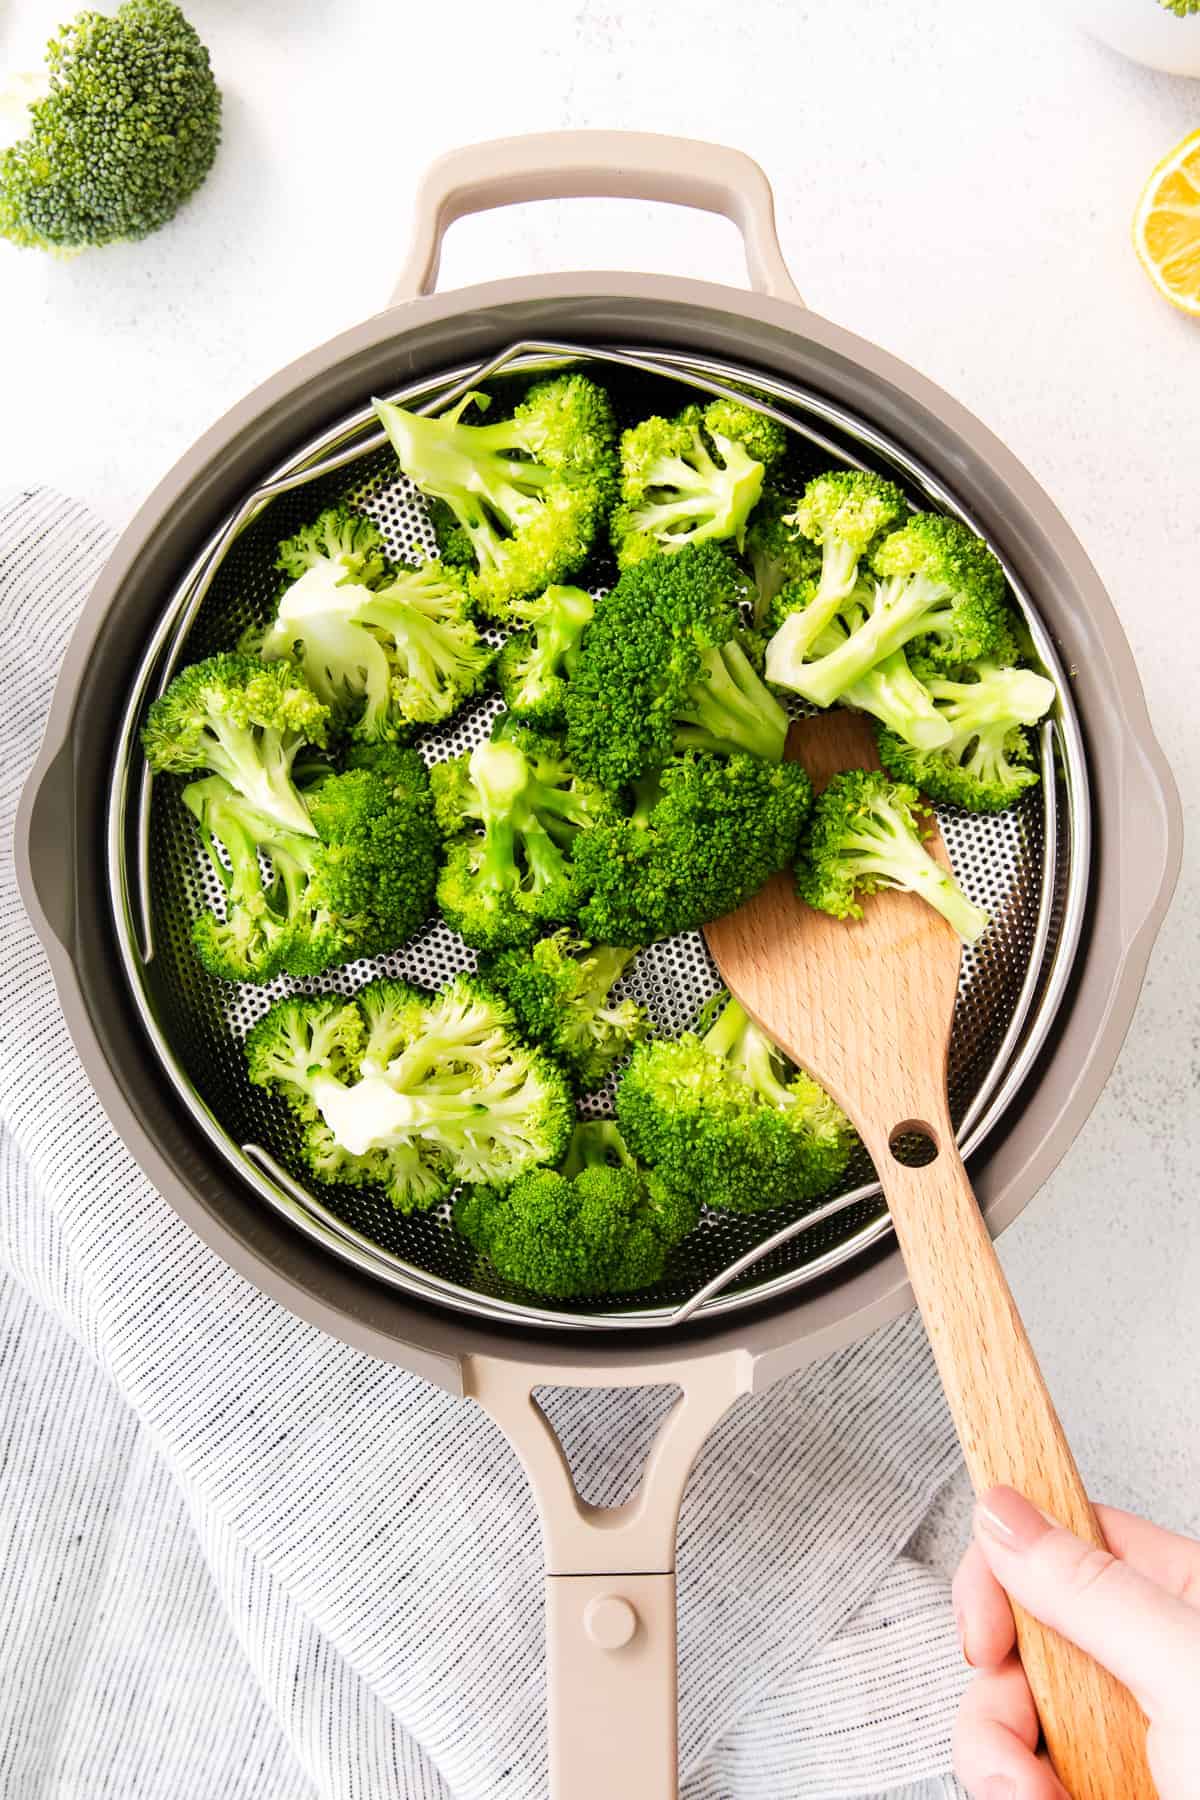 https://fitfoodiefinds.com/wp-content/uploads/2021/04/How-to-Steam-Broccoli-08.jpg